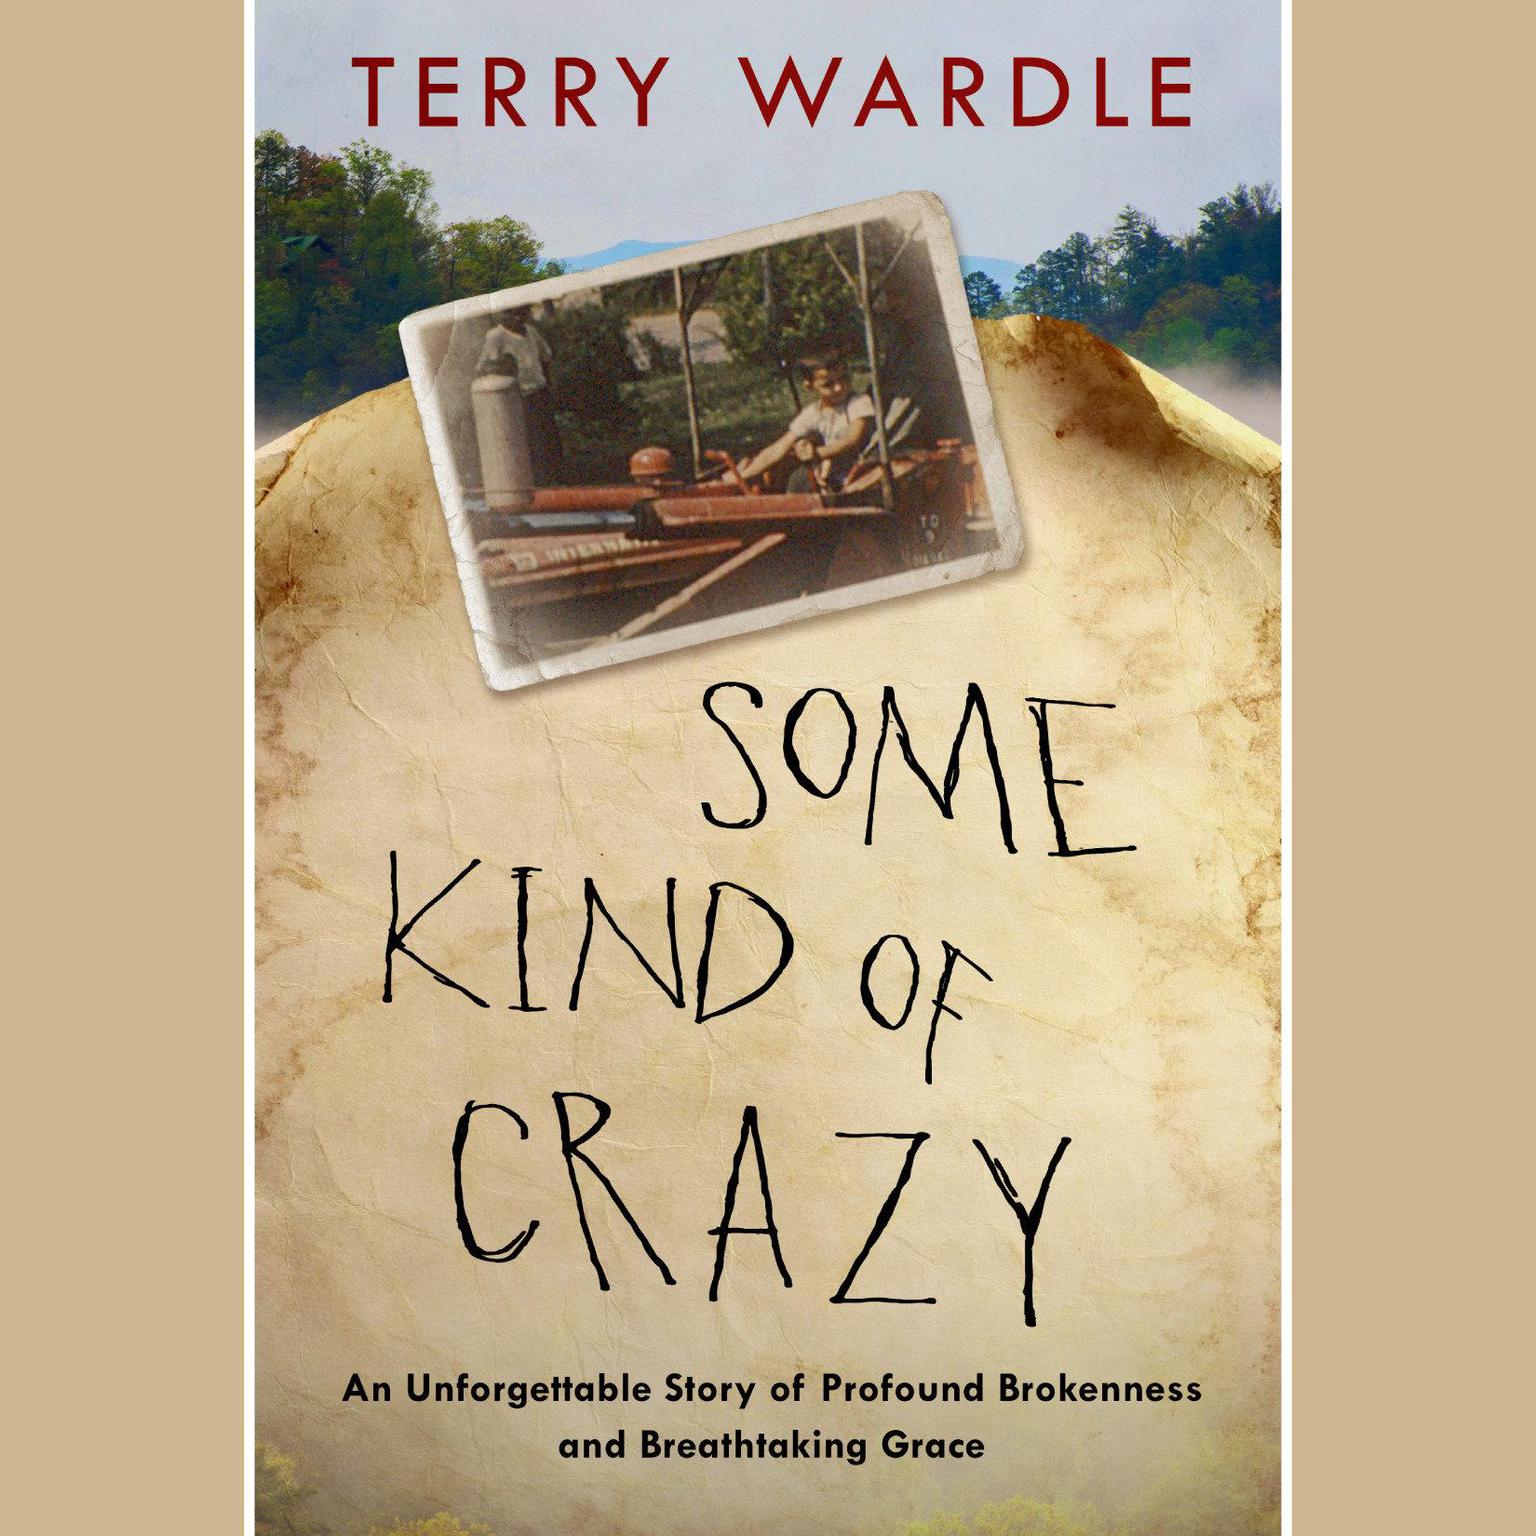 Some Kind of Crazy: An Unforgettable Story of Profound Brokenness and Breathtaking Grace Audiobook, by Terry Wardle